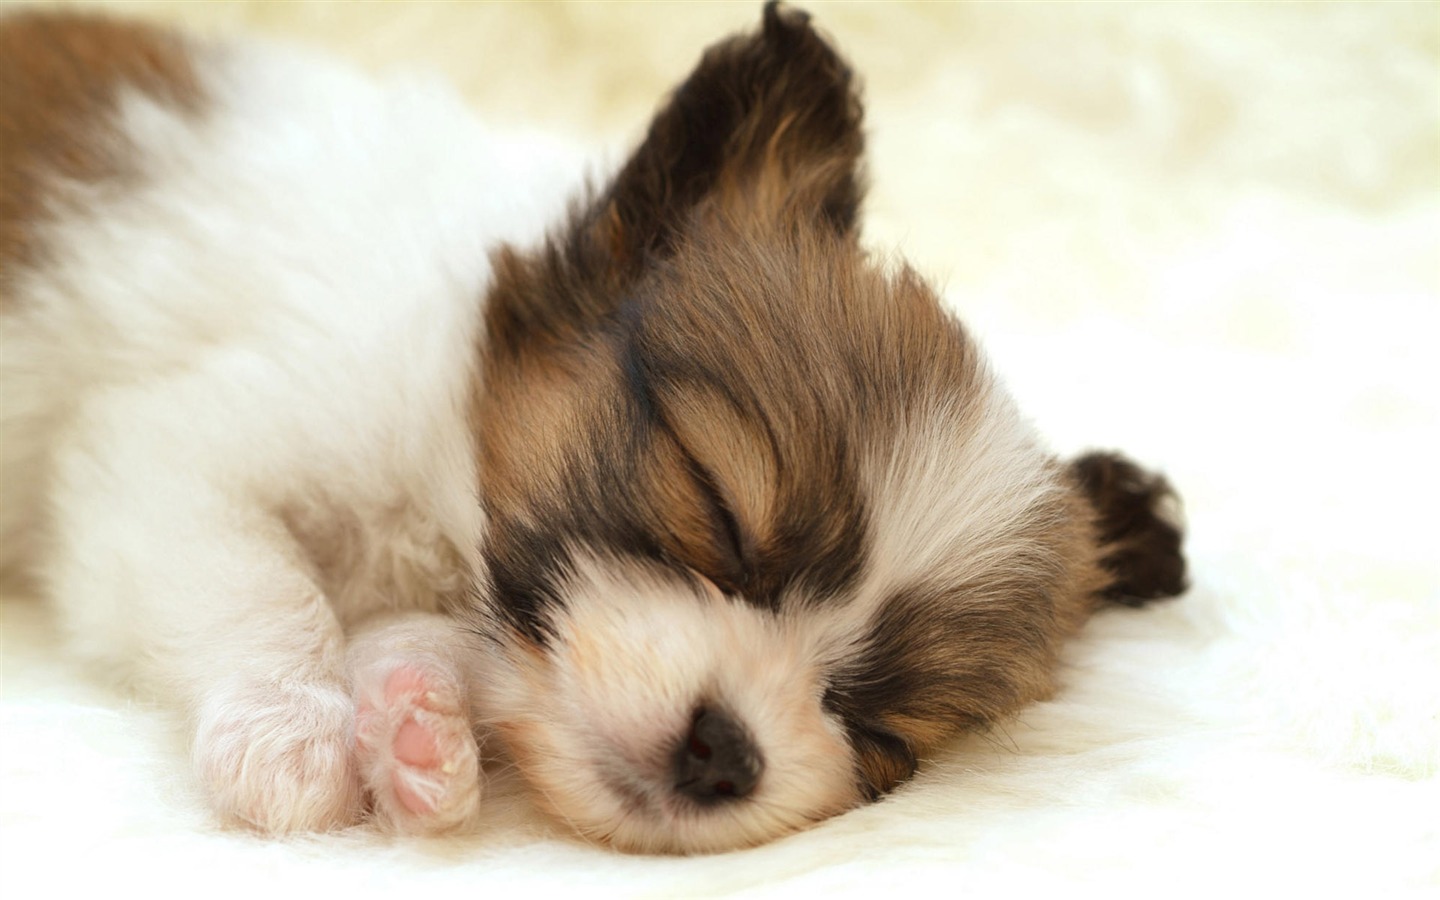 Puppy Photo HD wallpapers (10) #10 - 1440x900